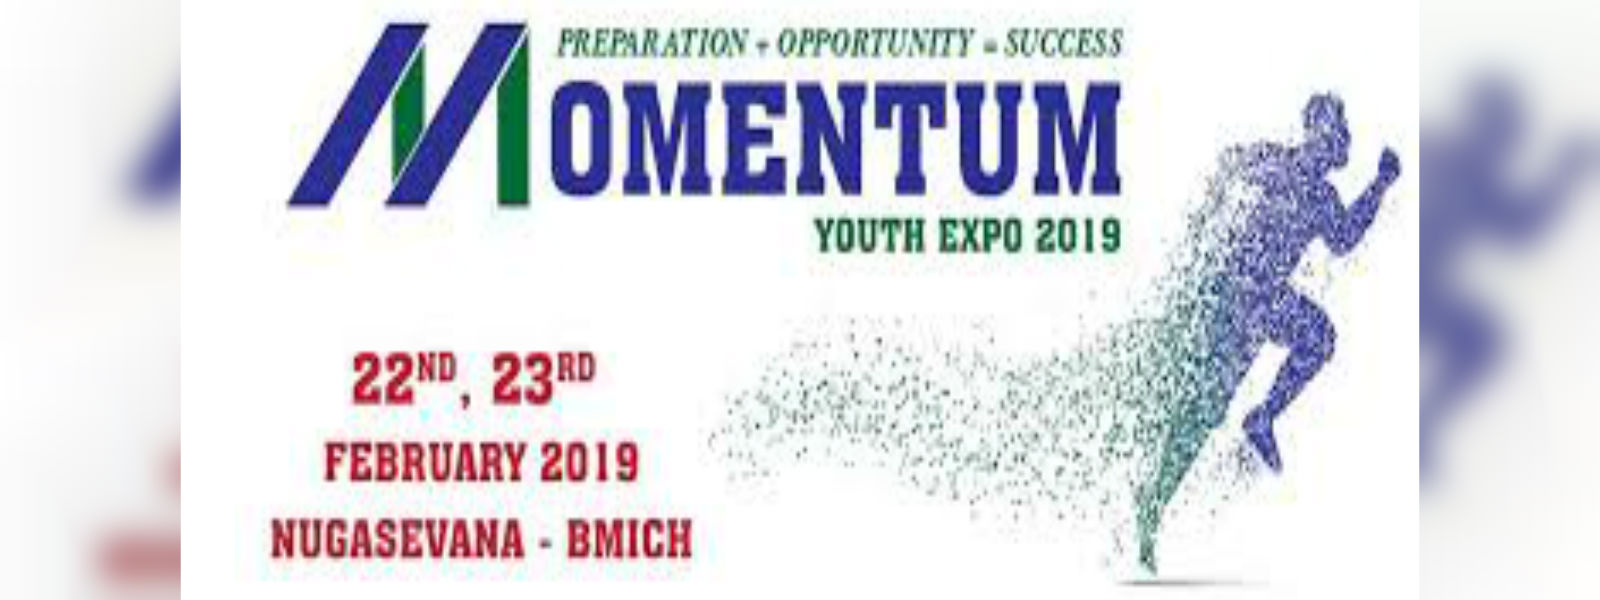 Momentum Youth Expo on 23rd